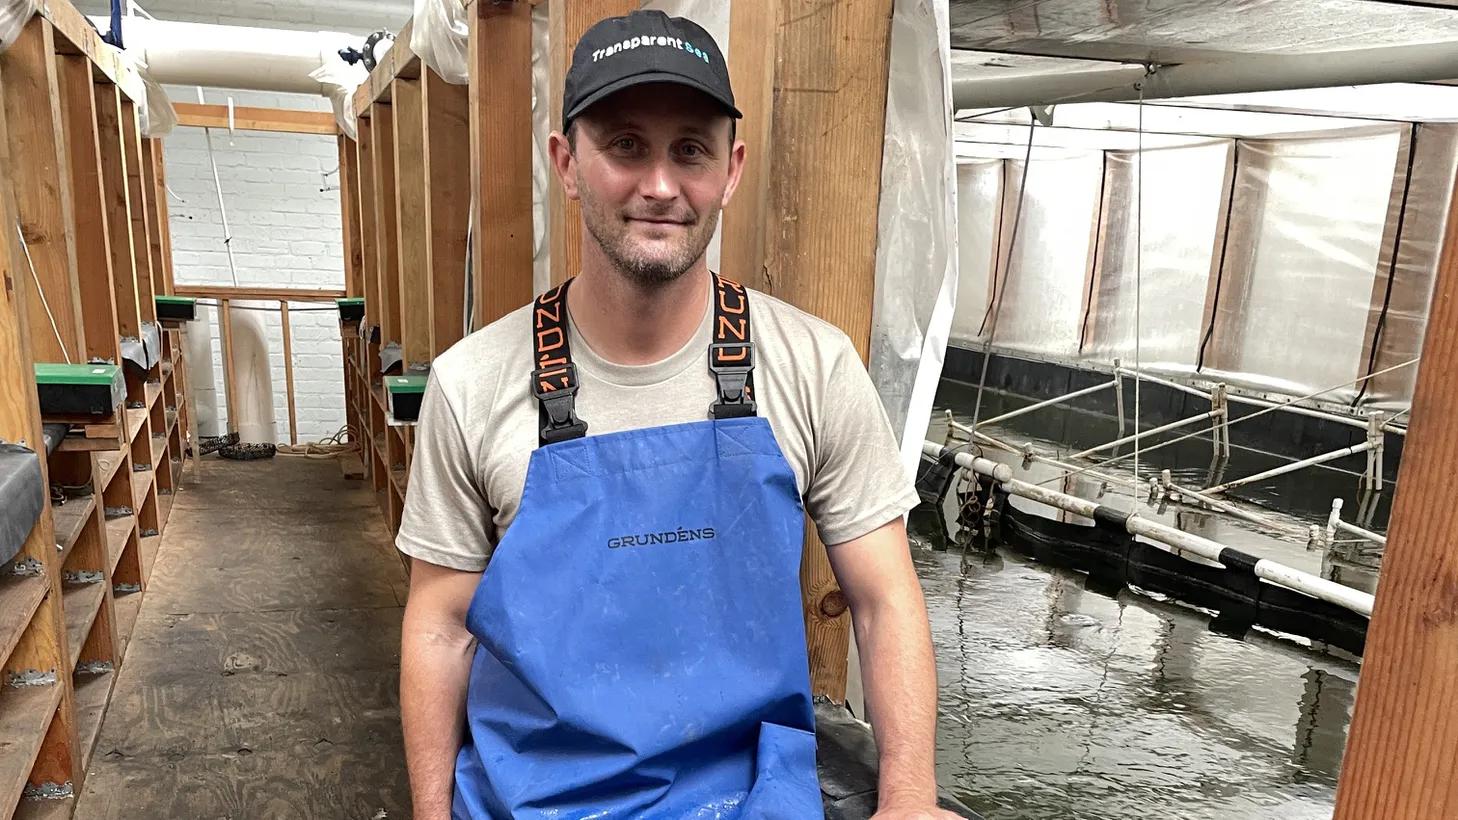 TransparentSea farms founder Steve Sutton poses next to a large tank of Pacific whiteleg prawns at his shrimp farm in Downey.